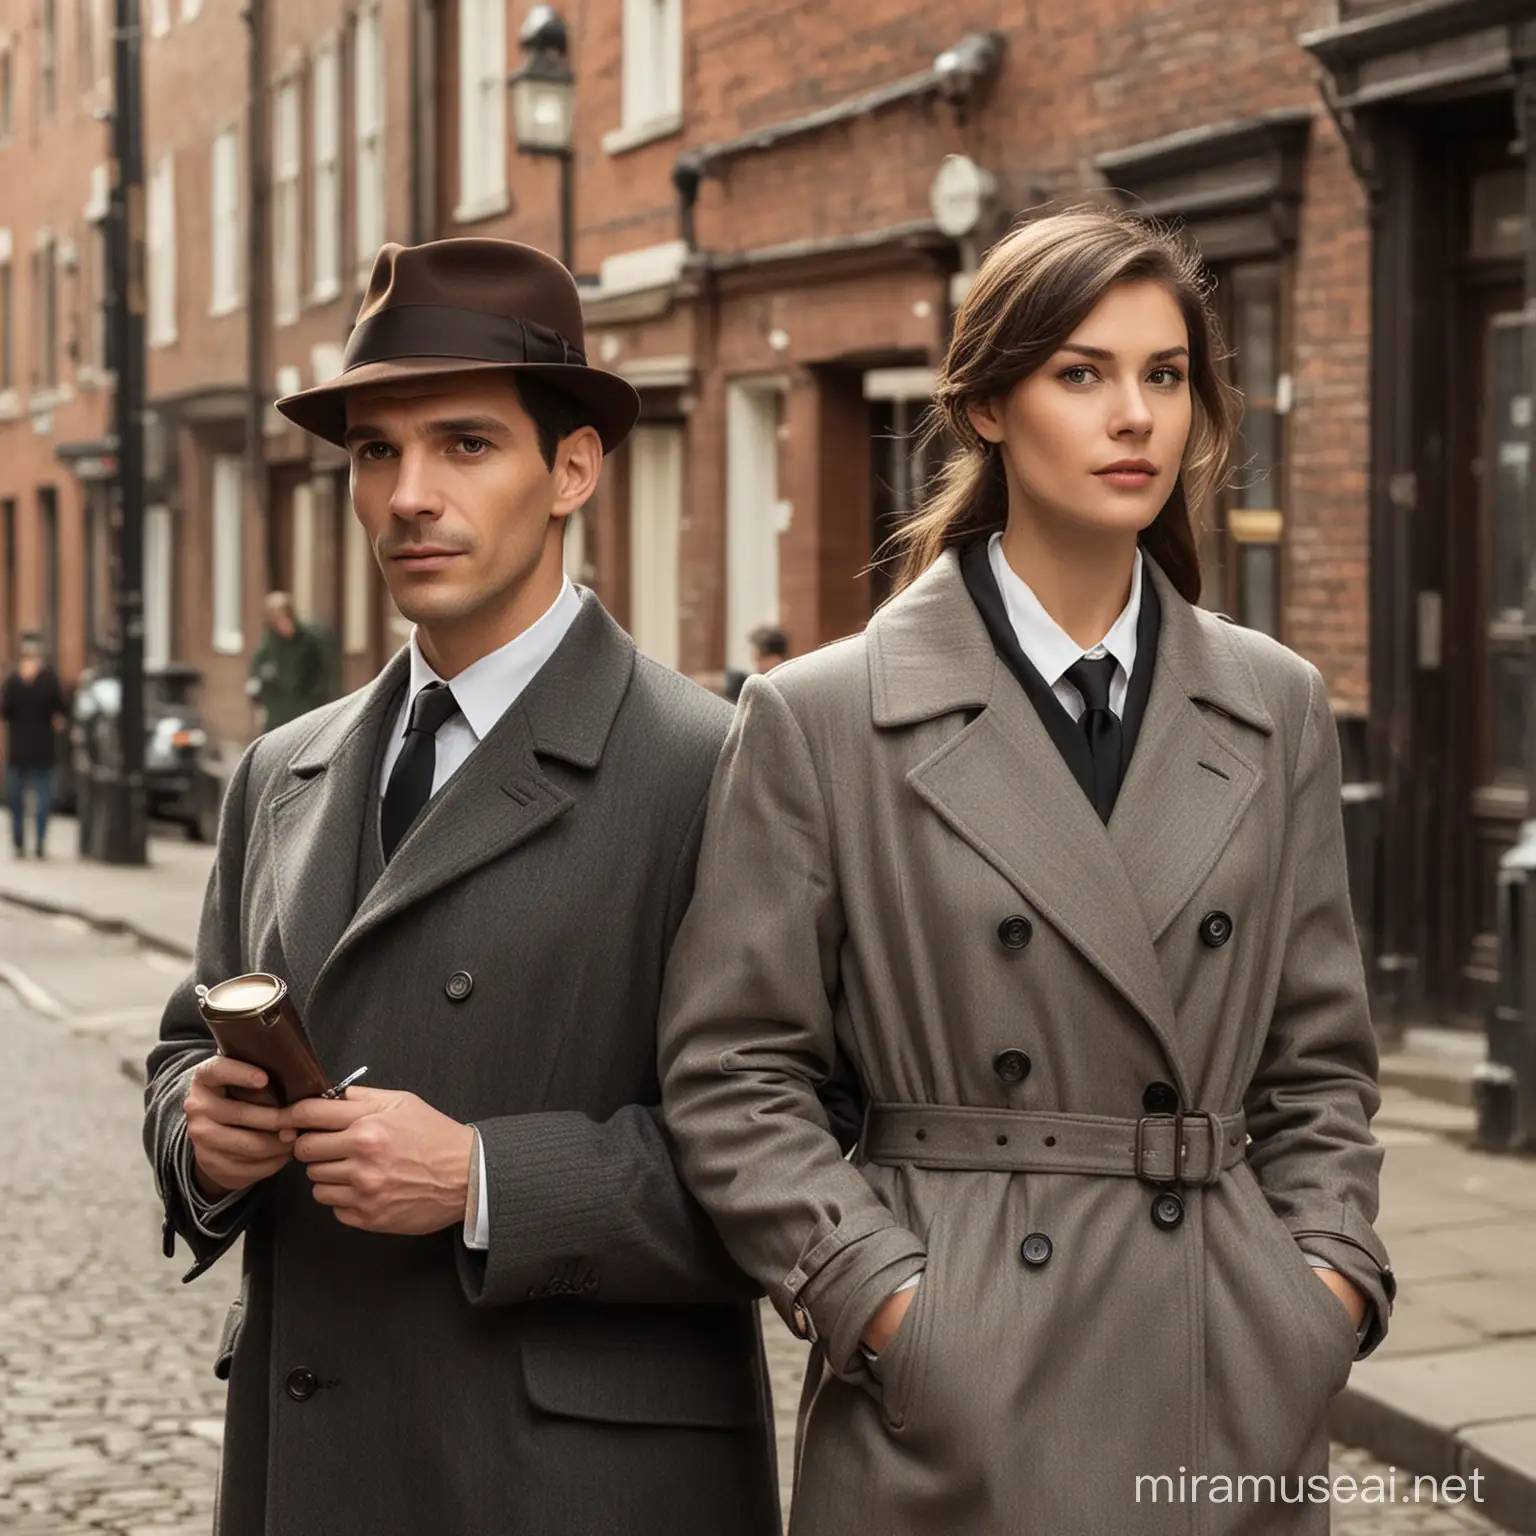 old-fashioned detectives, one male and one female